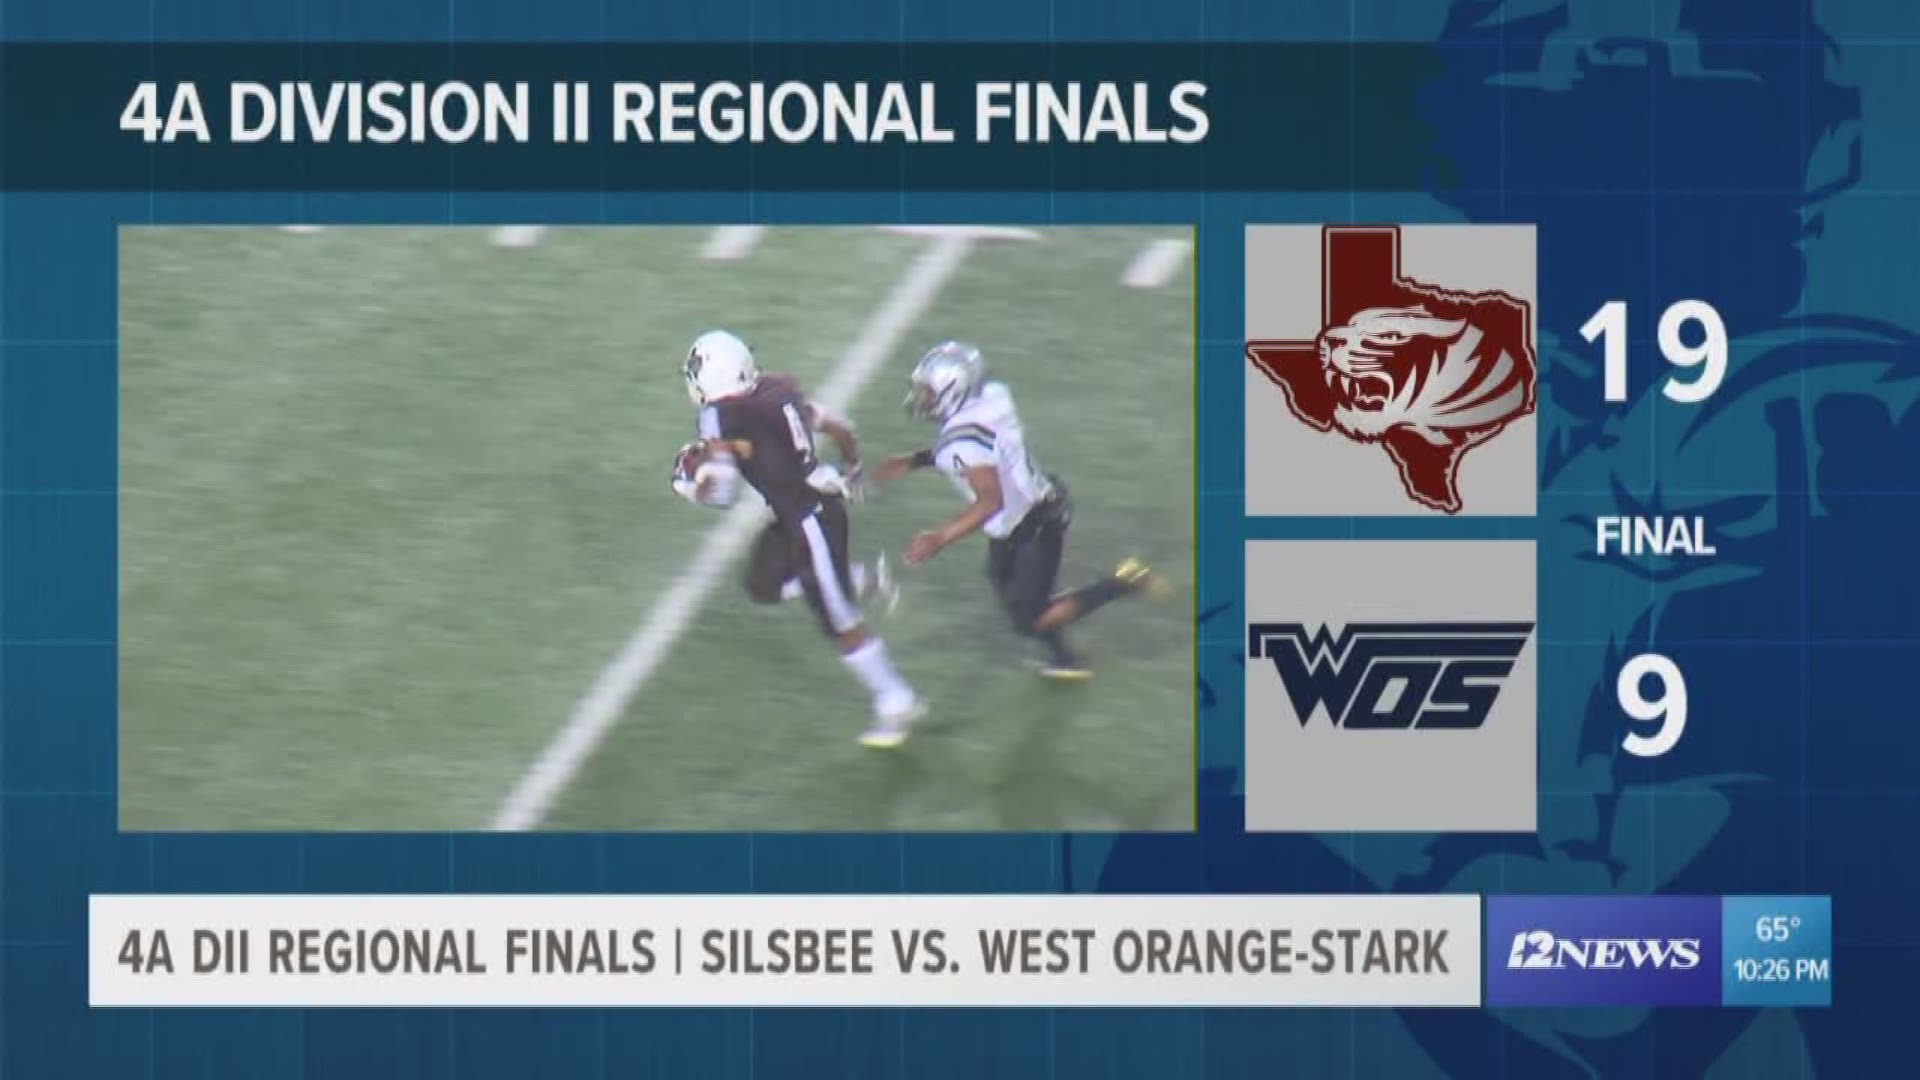 The Tigers advance to the 4A DII State Semifinals and they will play the winner of Saturday's Cuero-Navarro game.